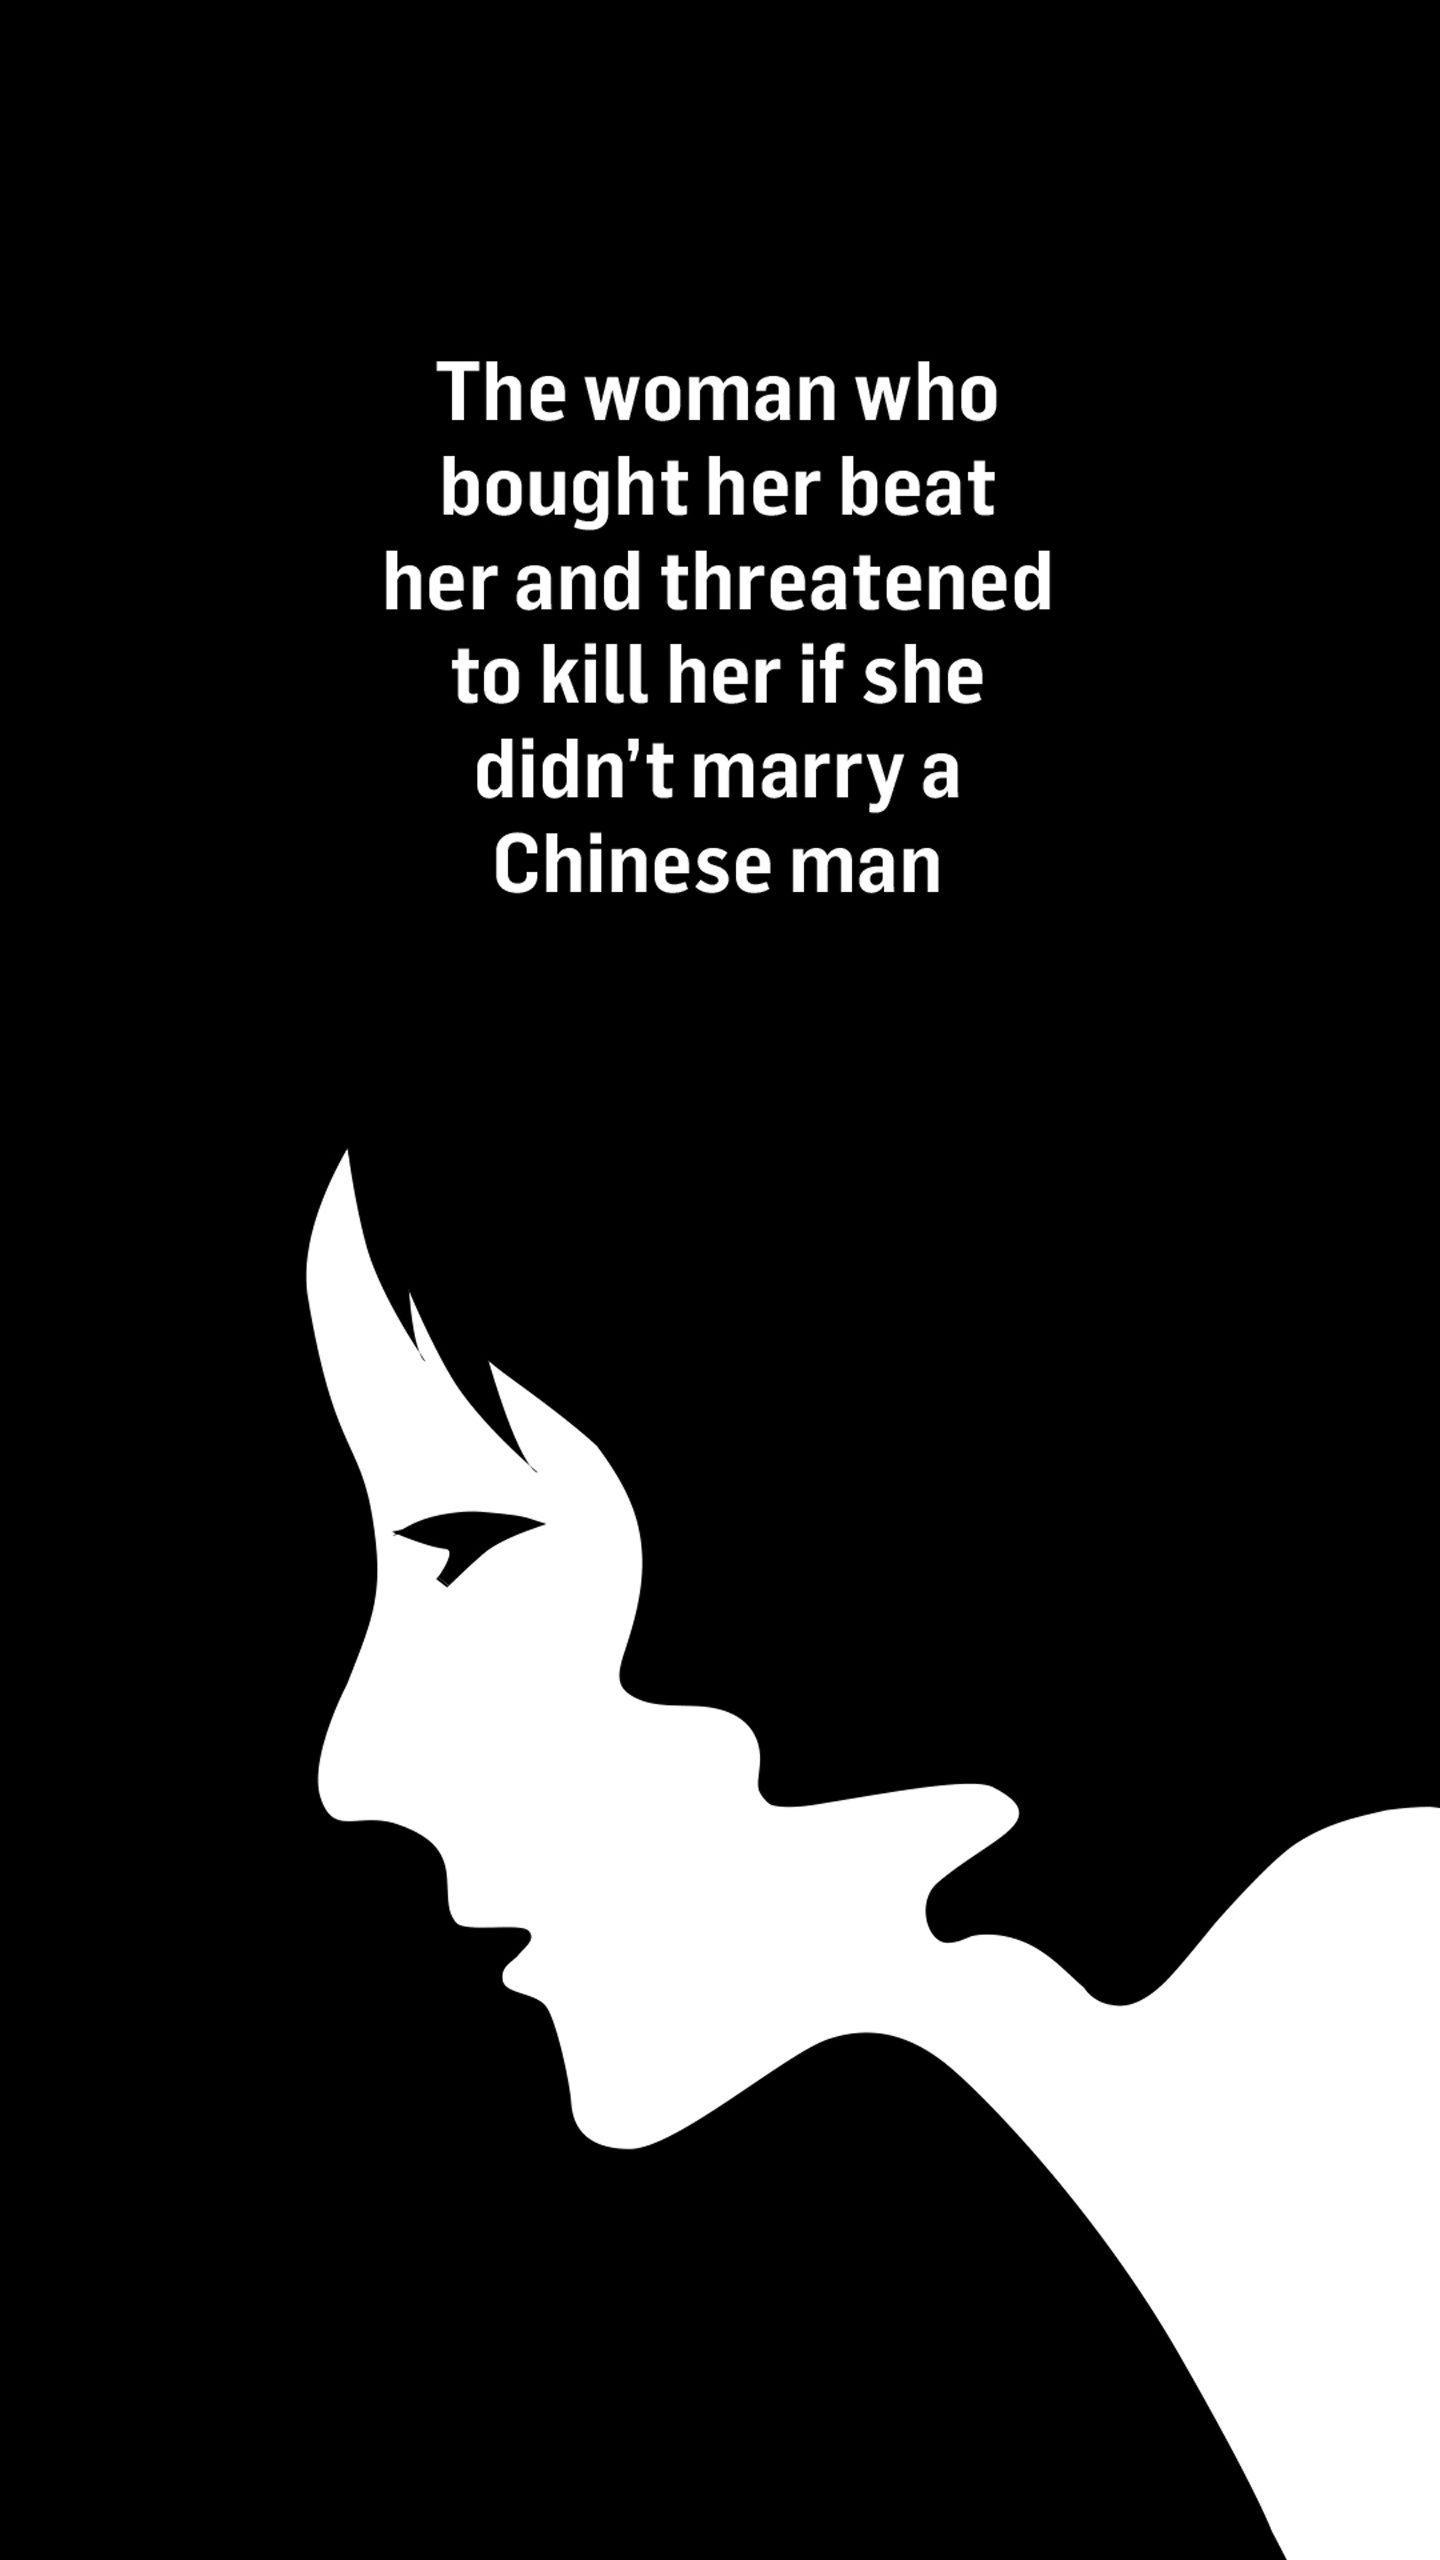 The silhouette of a woman's face and a second woman's face with text above them that reads: The woman who bought her beat her and threatened to kill her if she didn't marry a Chinese man.